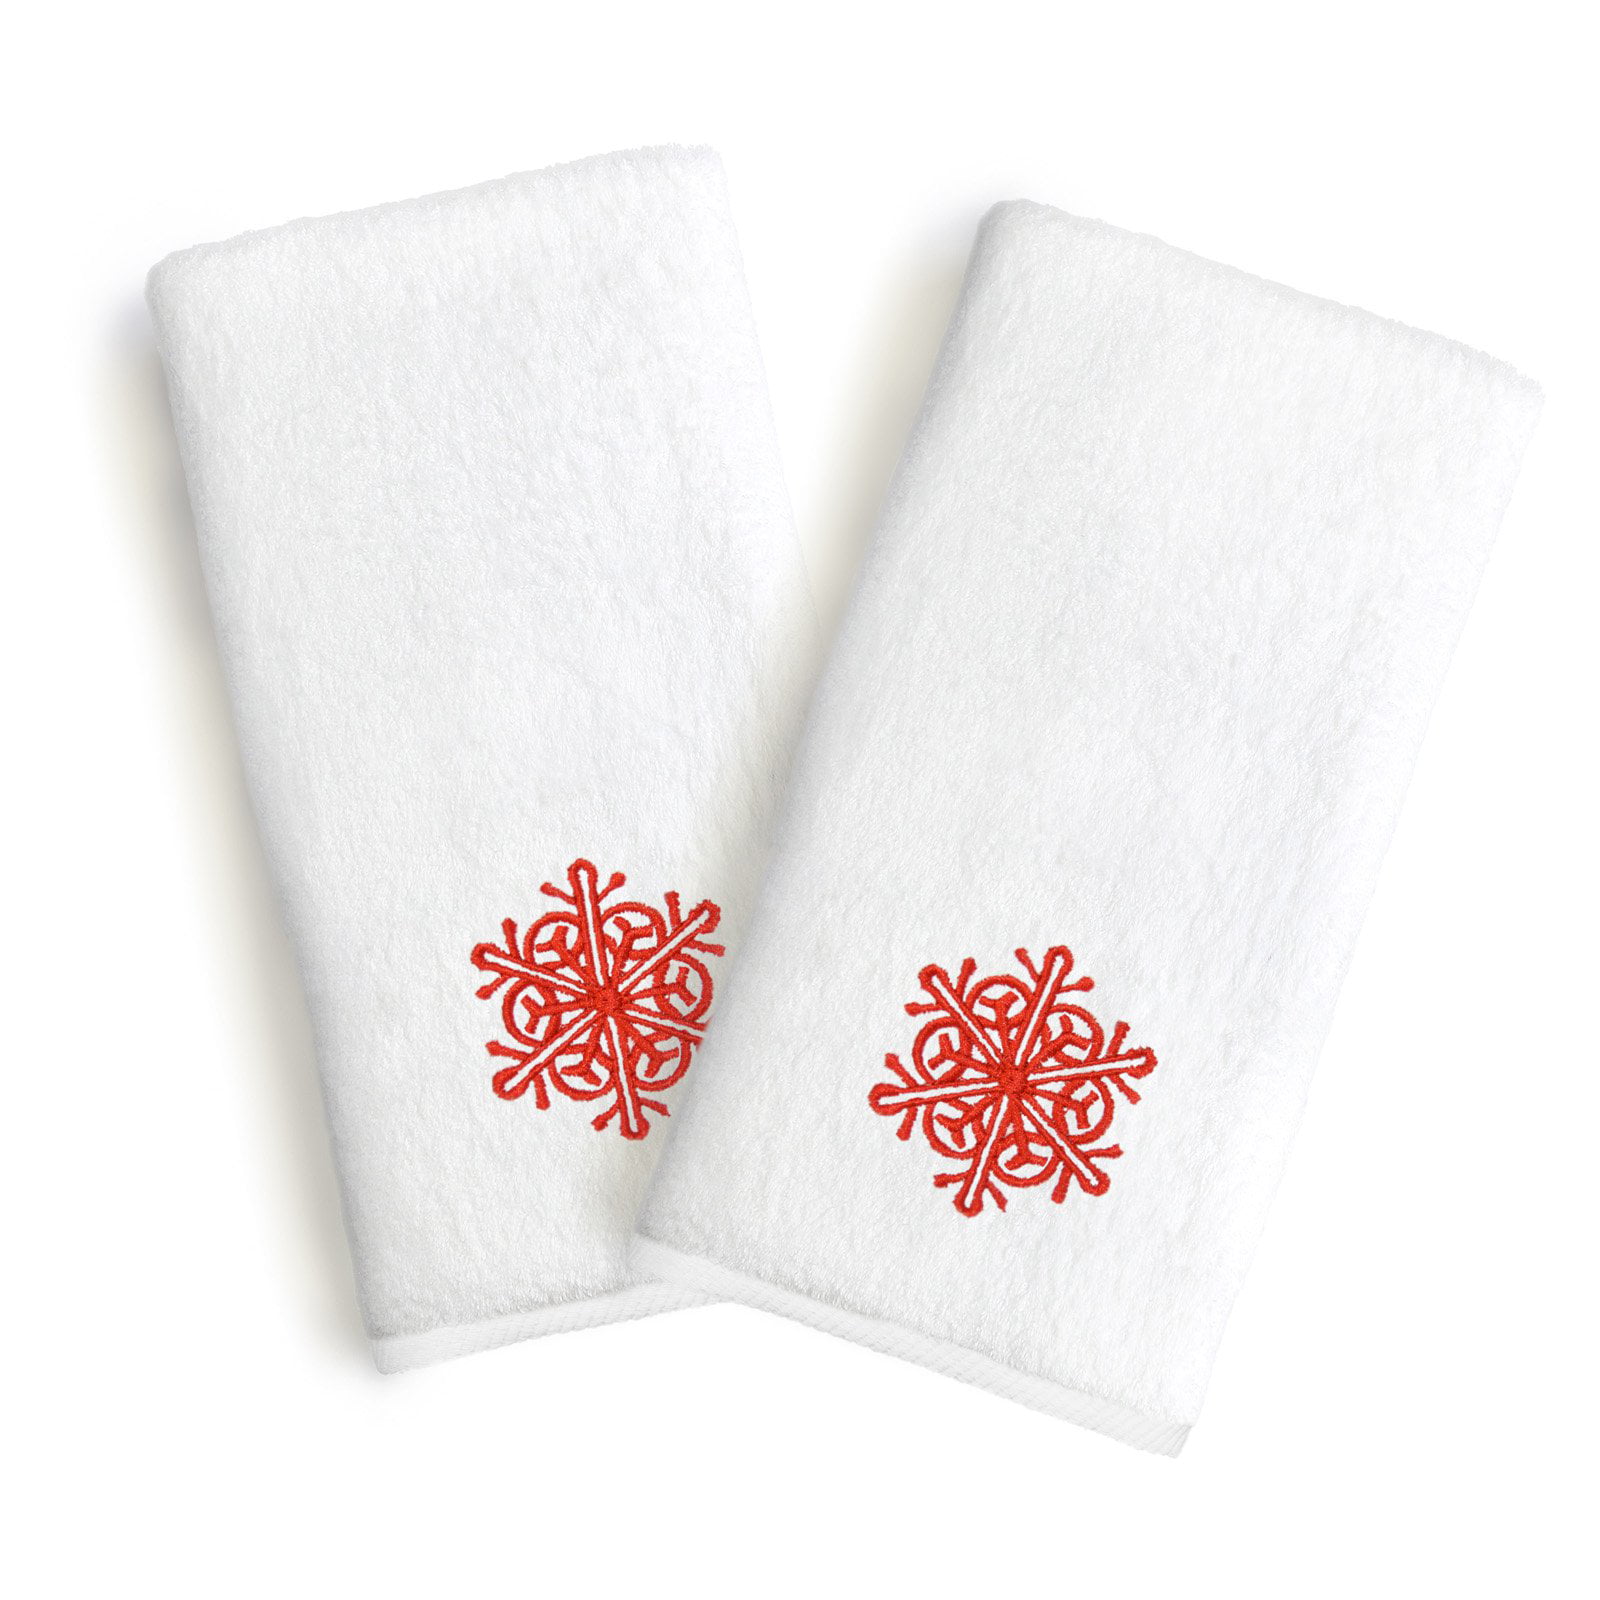 New Snowflake in red and white Kitchen towel set of 2 